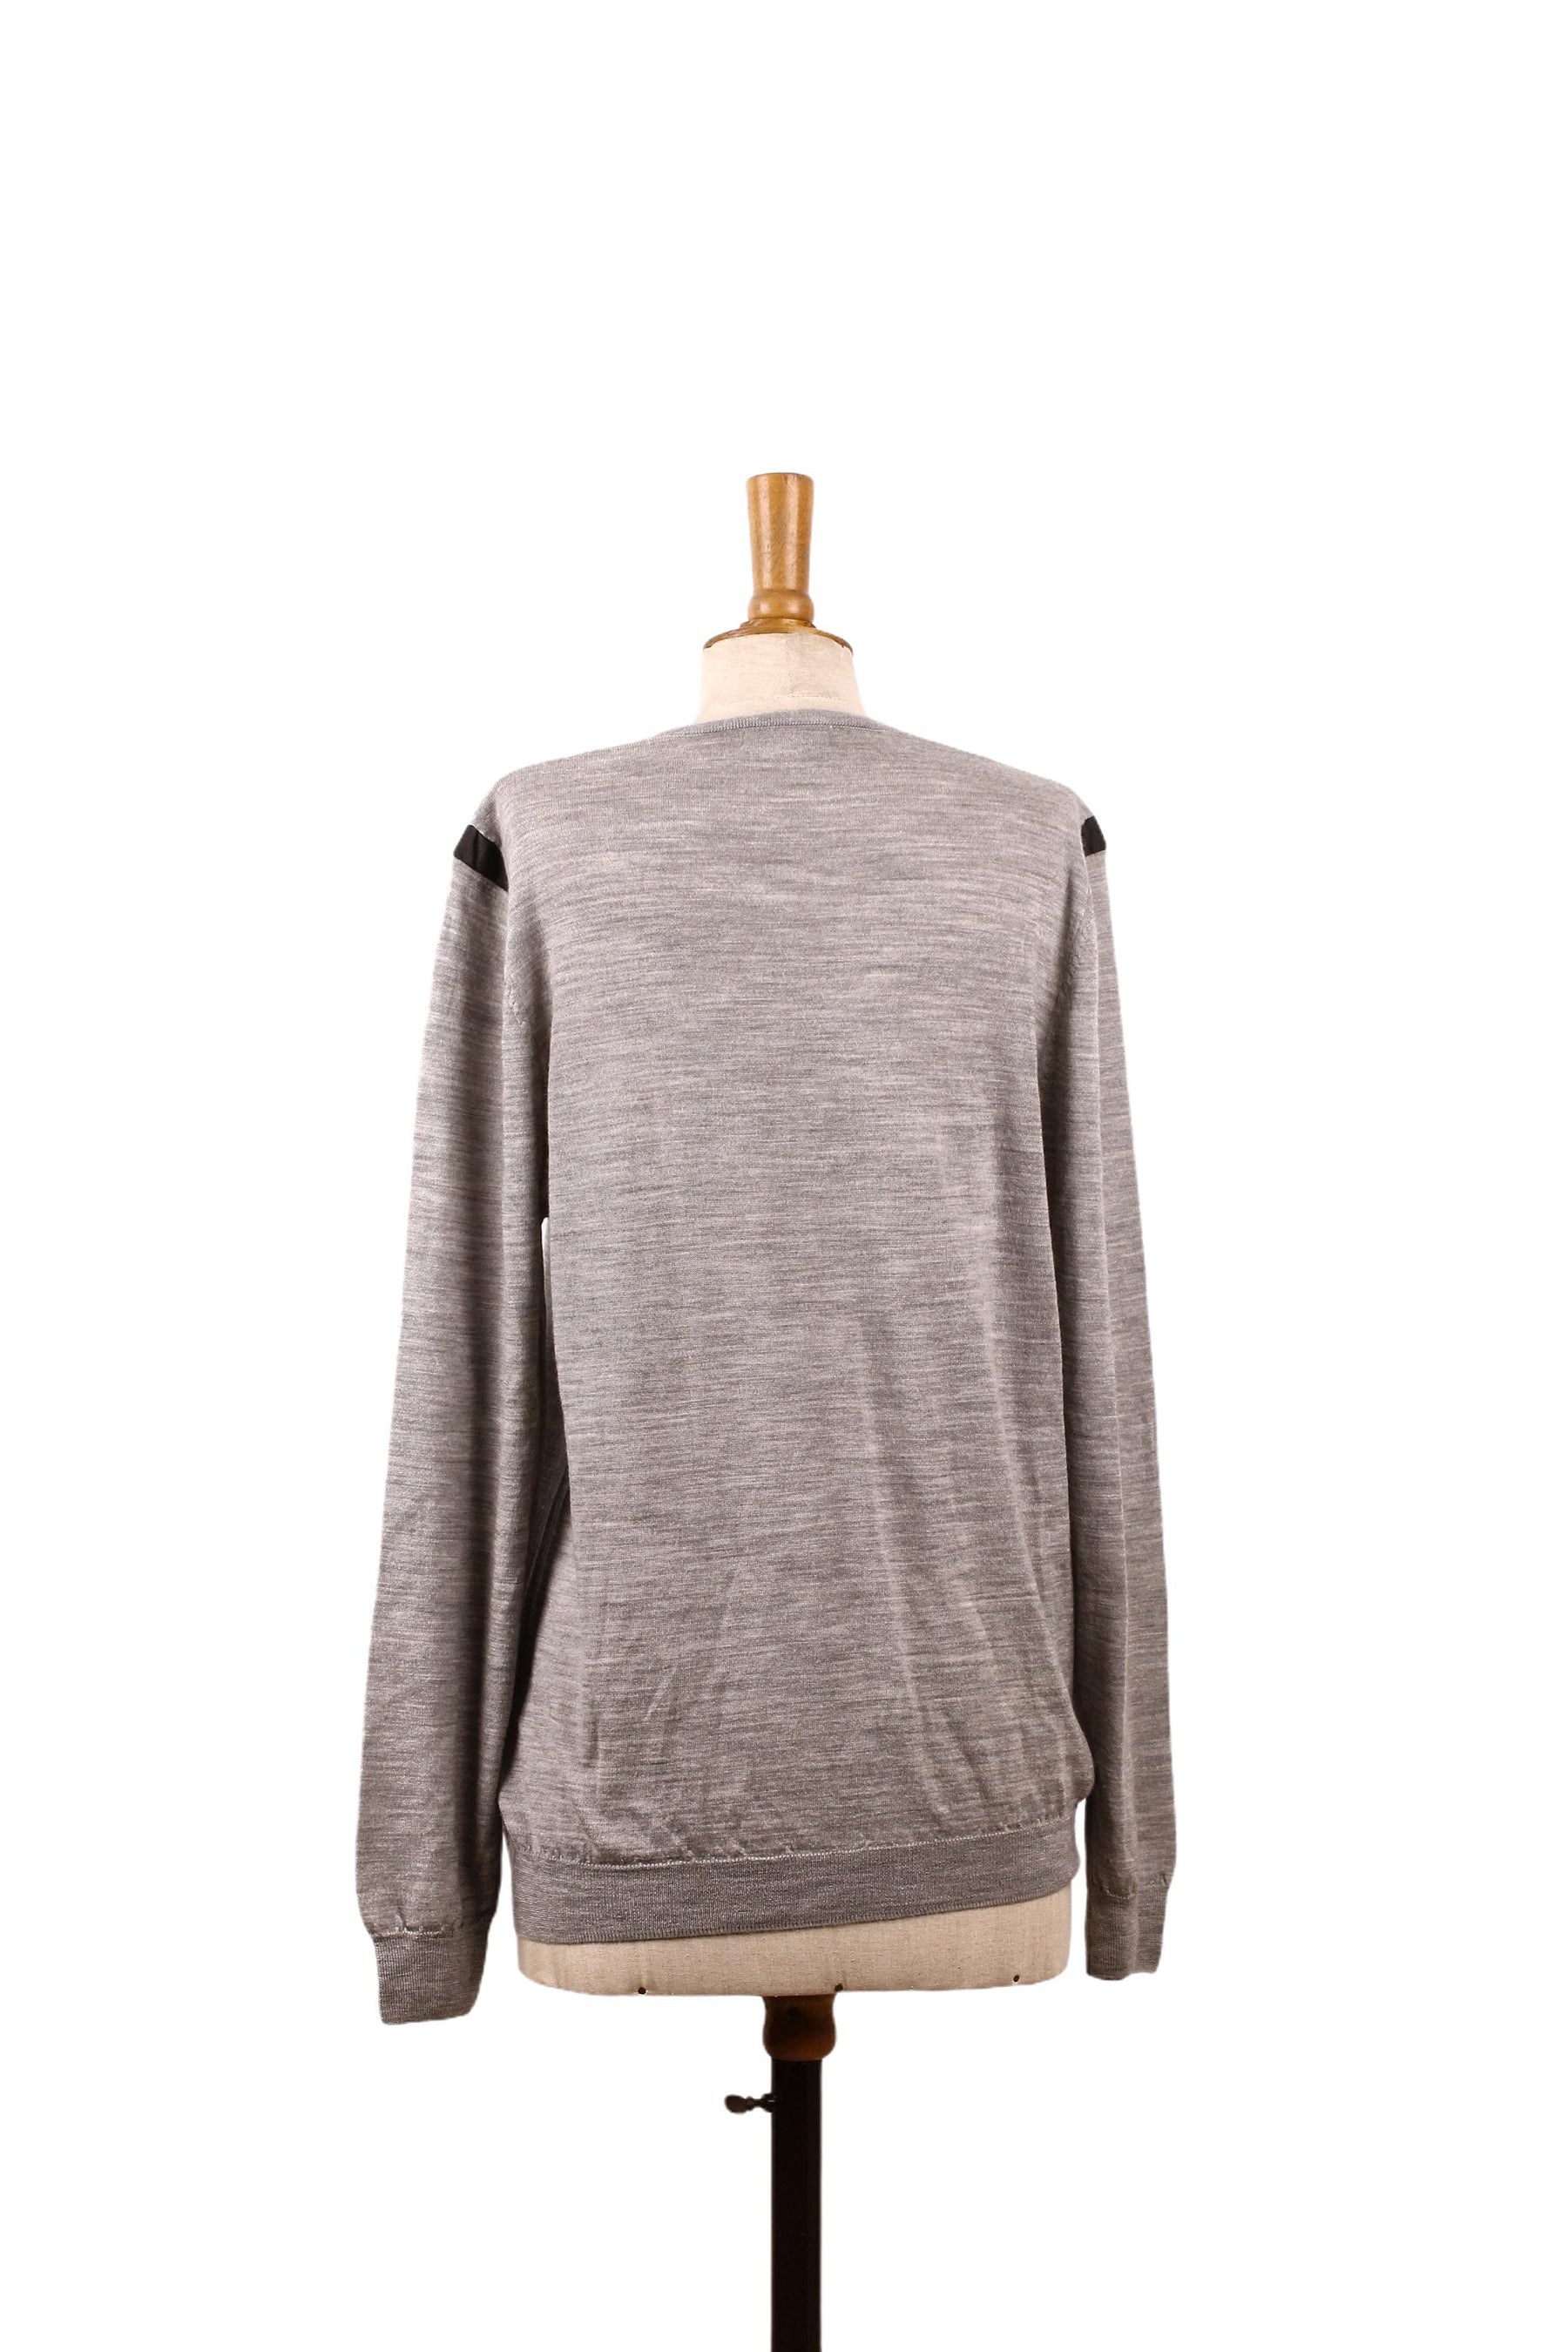 Pull-over The Kooples  Gris